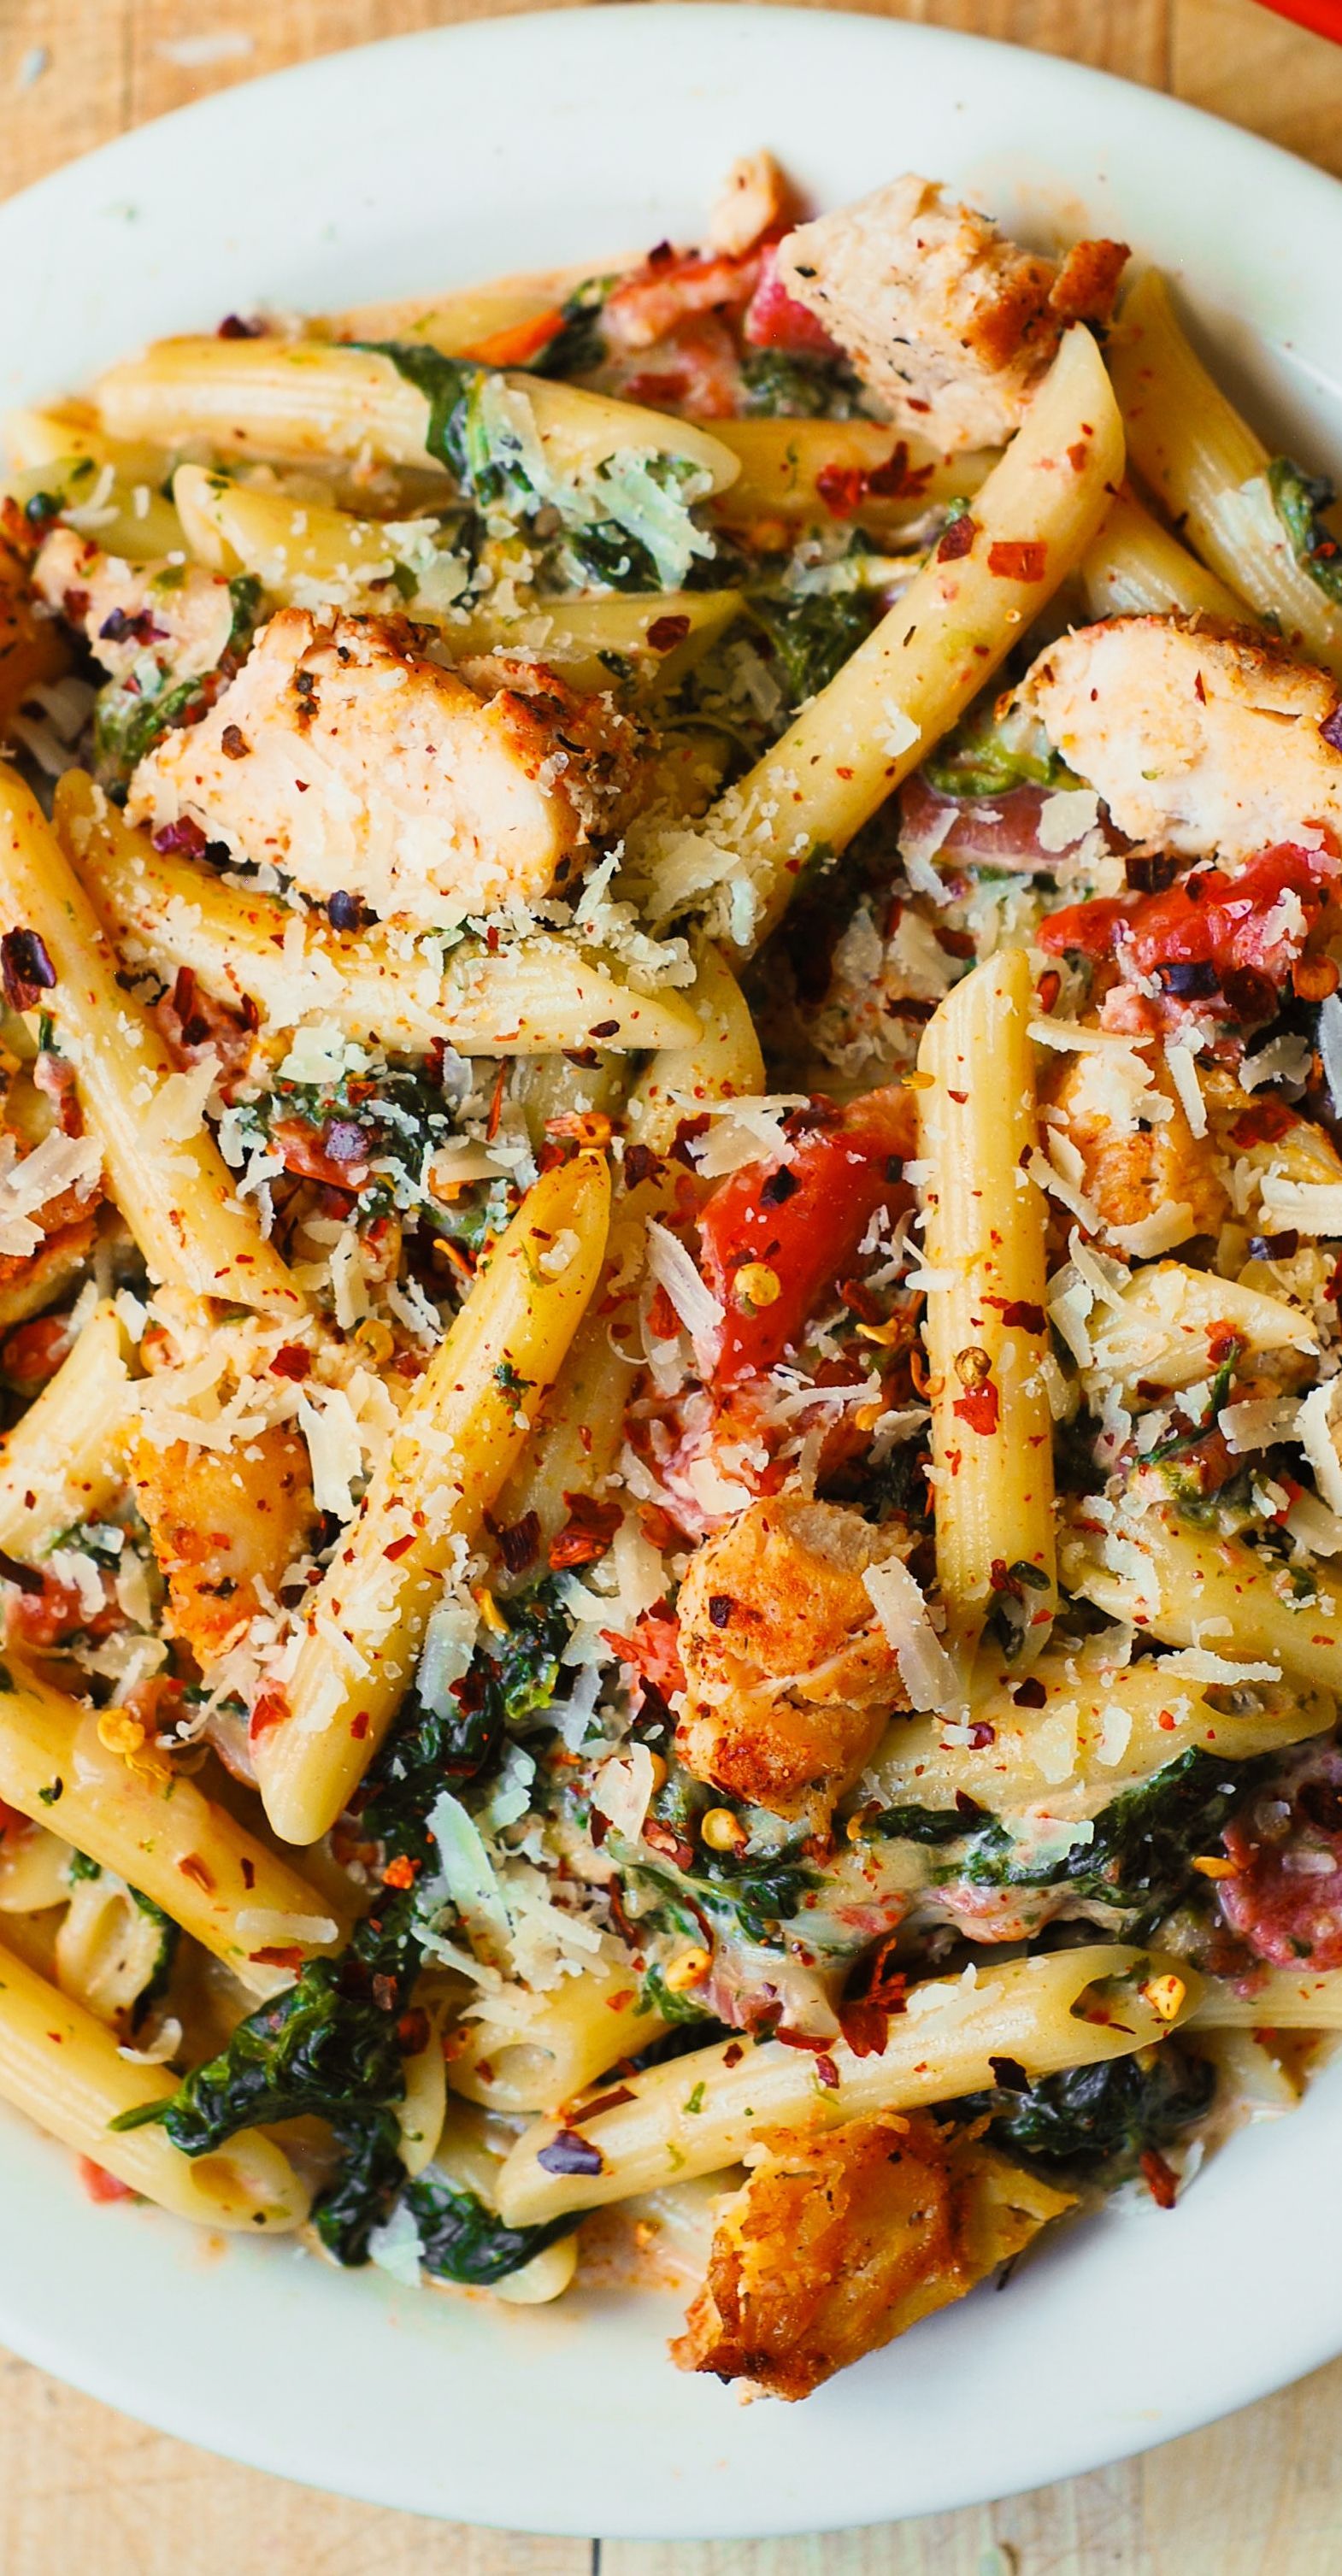 Chicken and Bacon Pasta with Spinach and Tomatoes in Garlic Cream Sauce – delicious creamy sauce perfectly blends together all